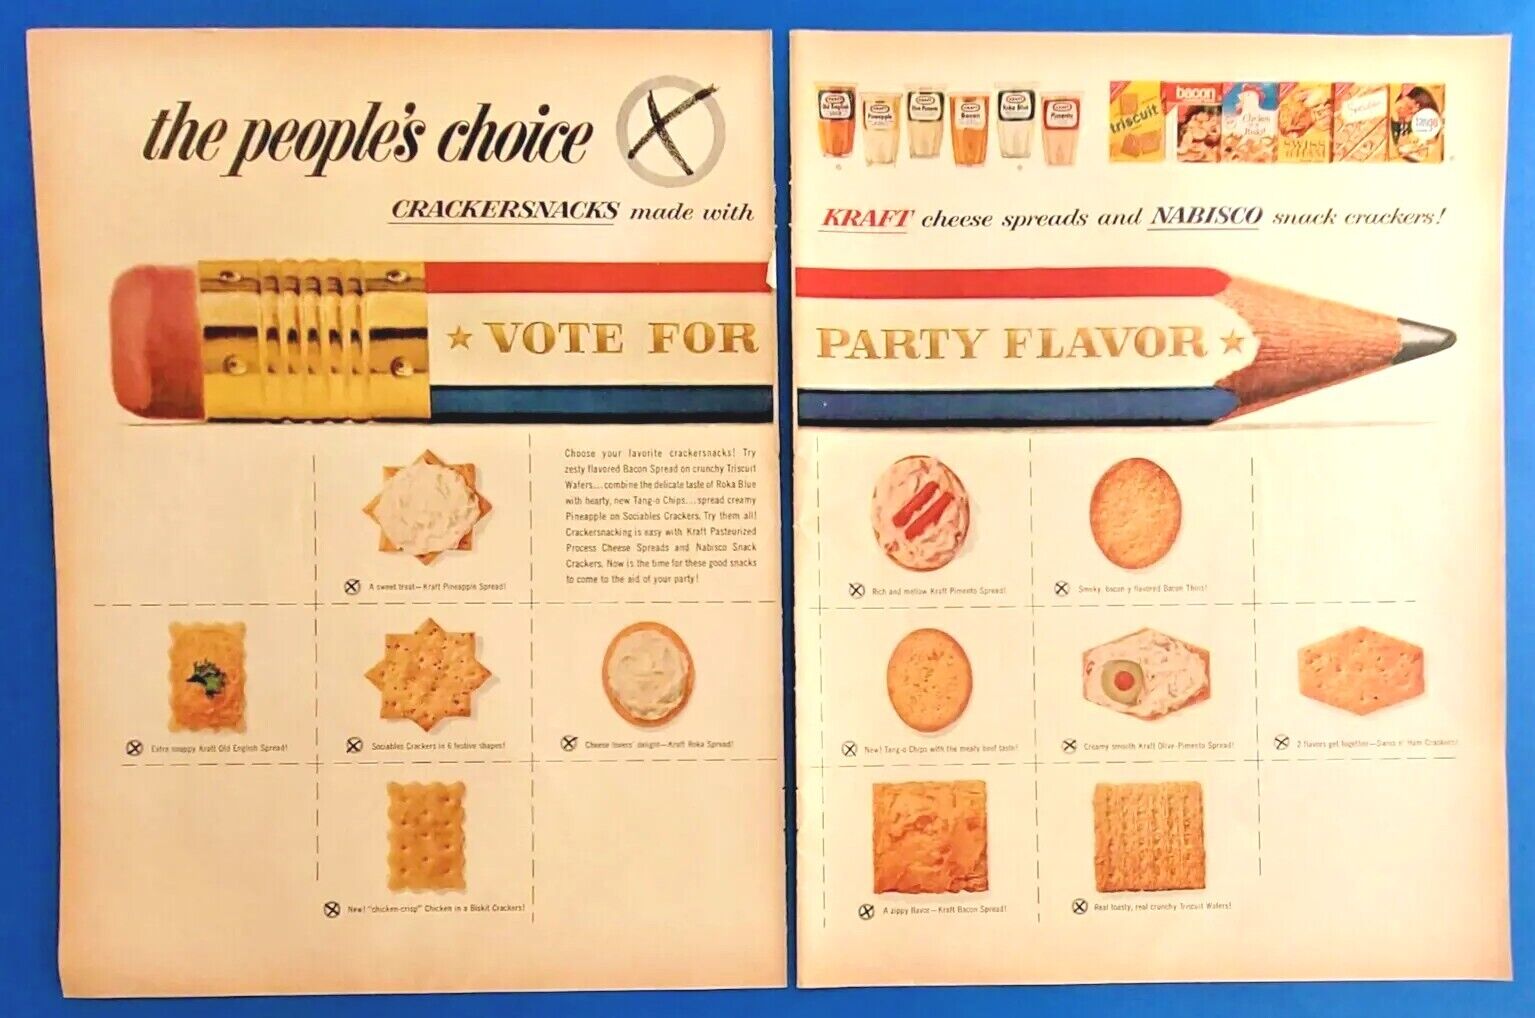 1964 Nabisco Crackersnacks Vote For Party Flavor 2-Page 1960's Magazine Print Ad